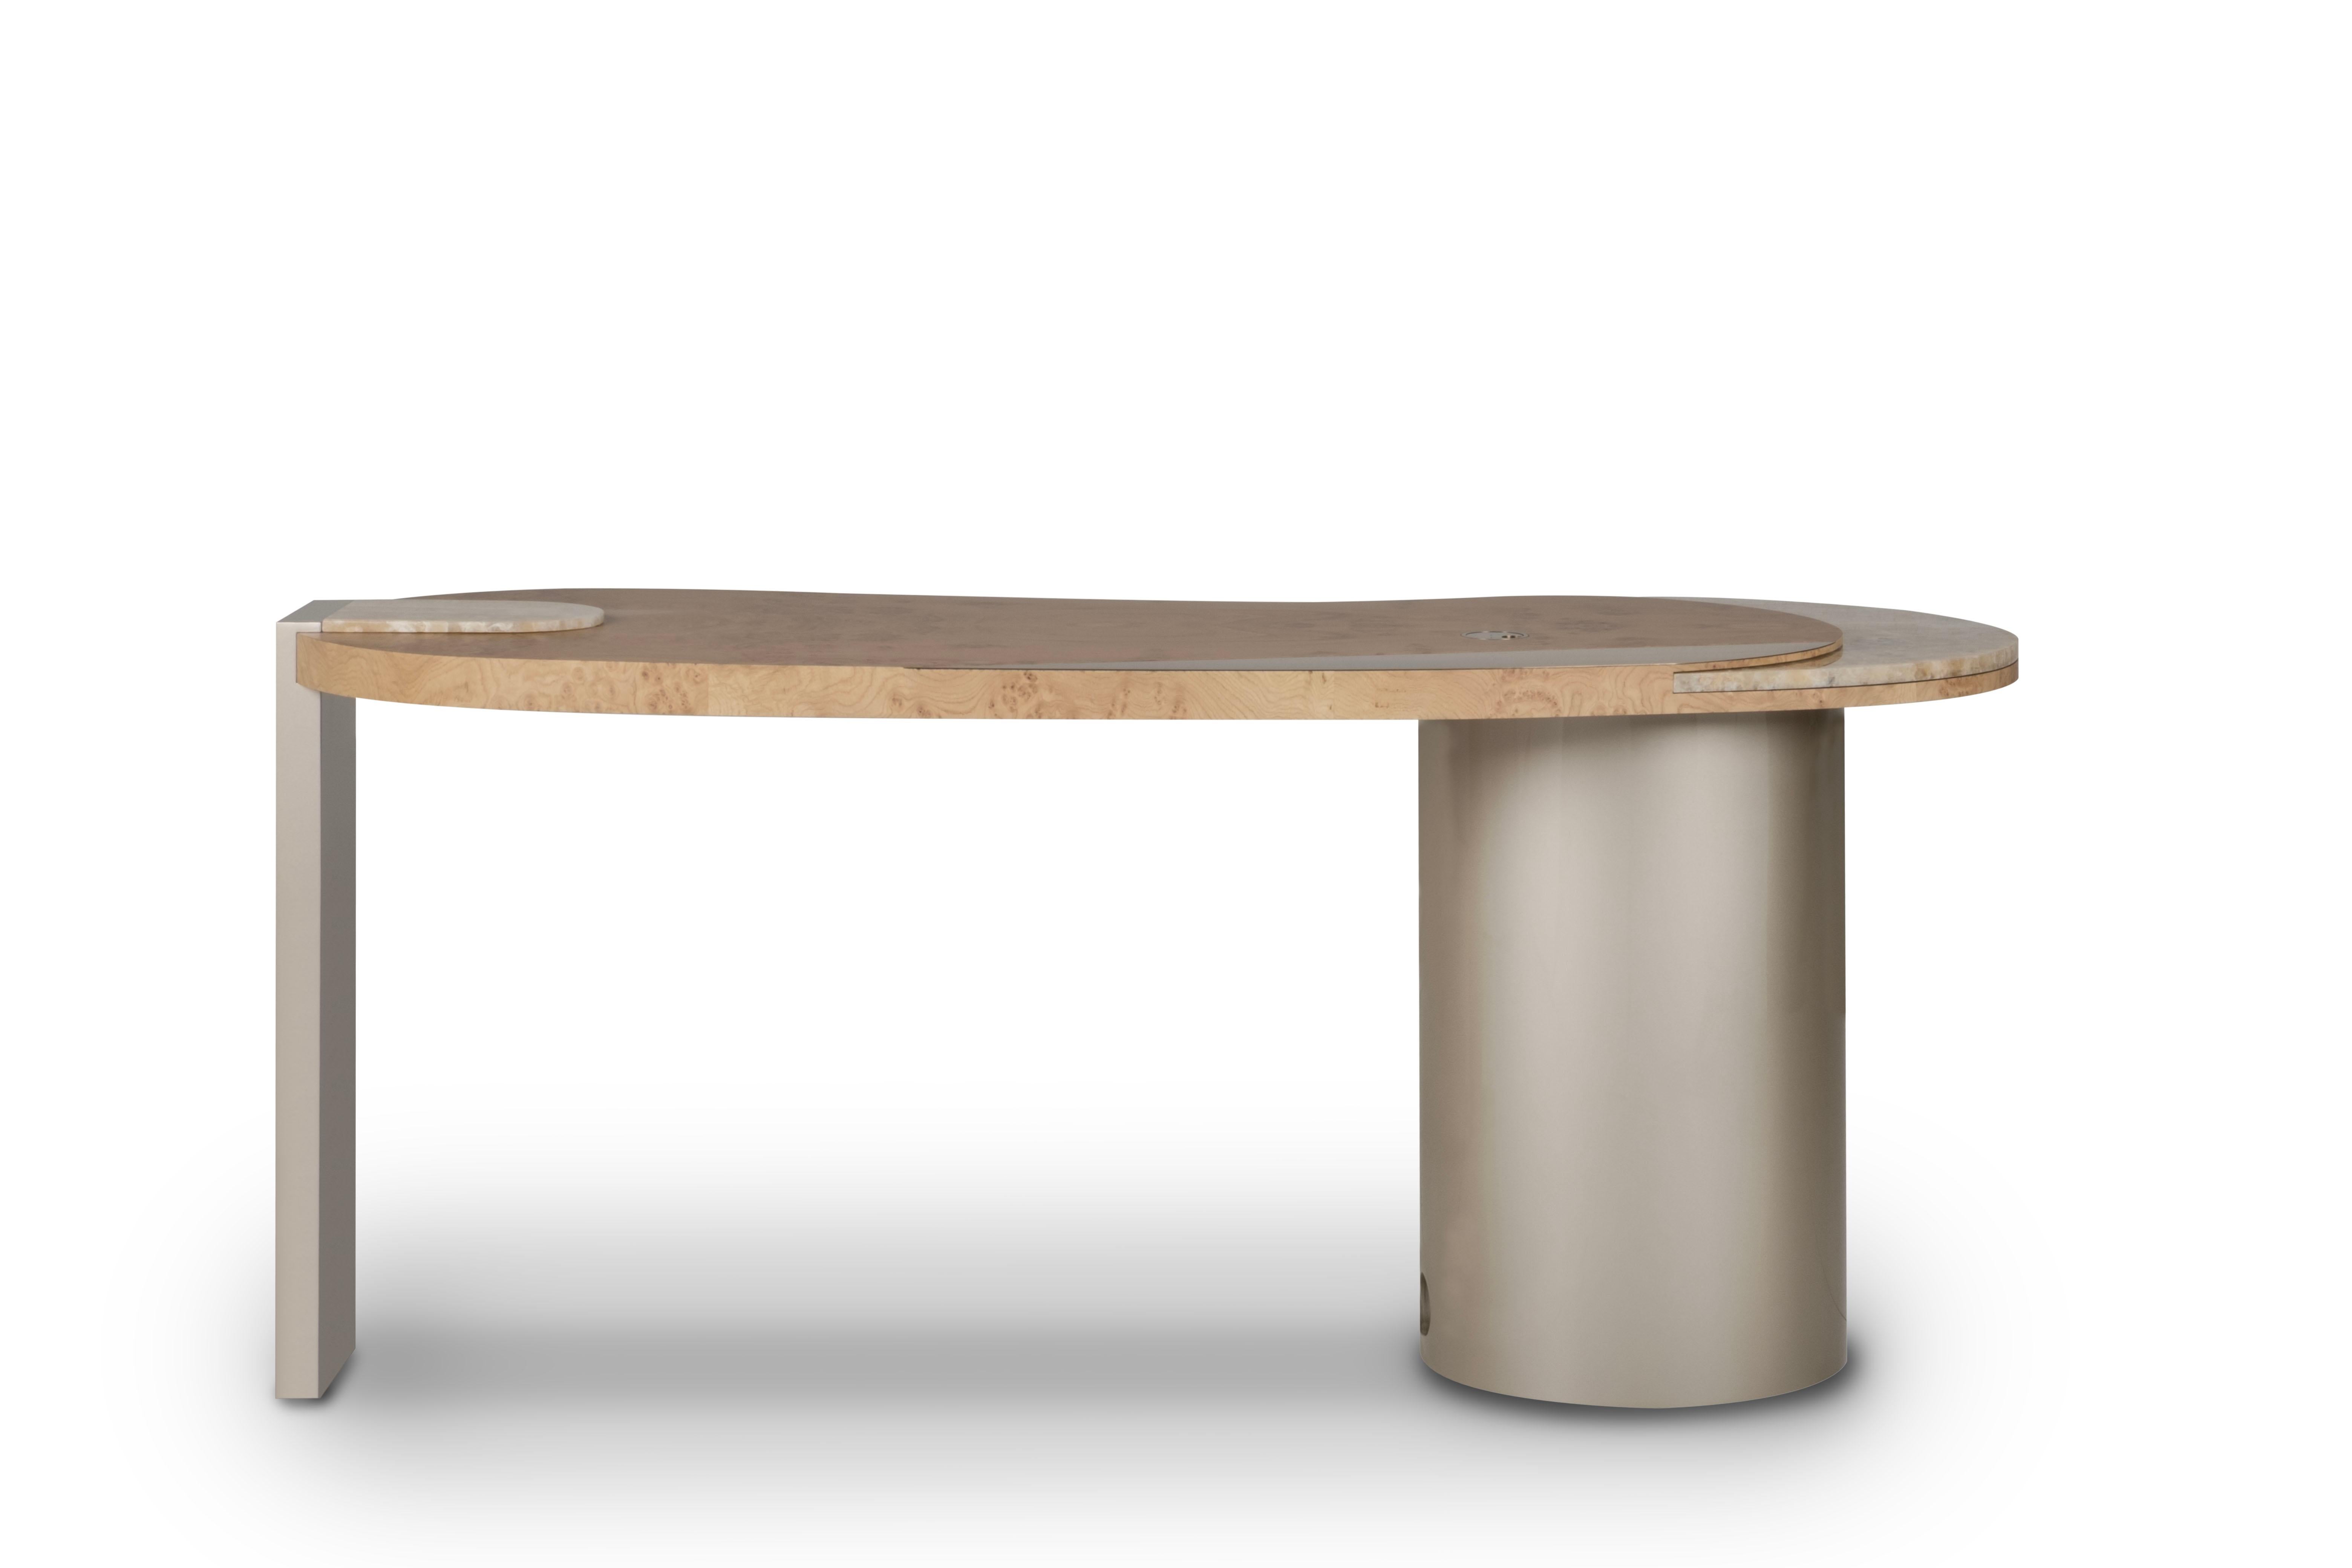 Armona desk, Contemporary Collection, Handcrafted in Portugal - Europe by Greenapple.

Designed by Rute Martins for the Contemporary Collection, the Armona modern desk pays homage to the natural beauty and organic lines of Armona island.